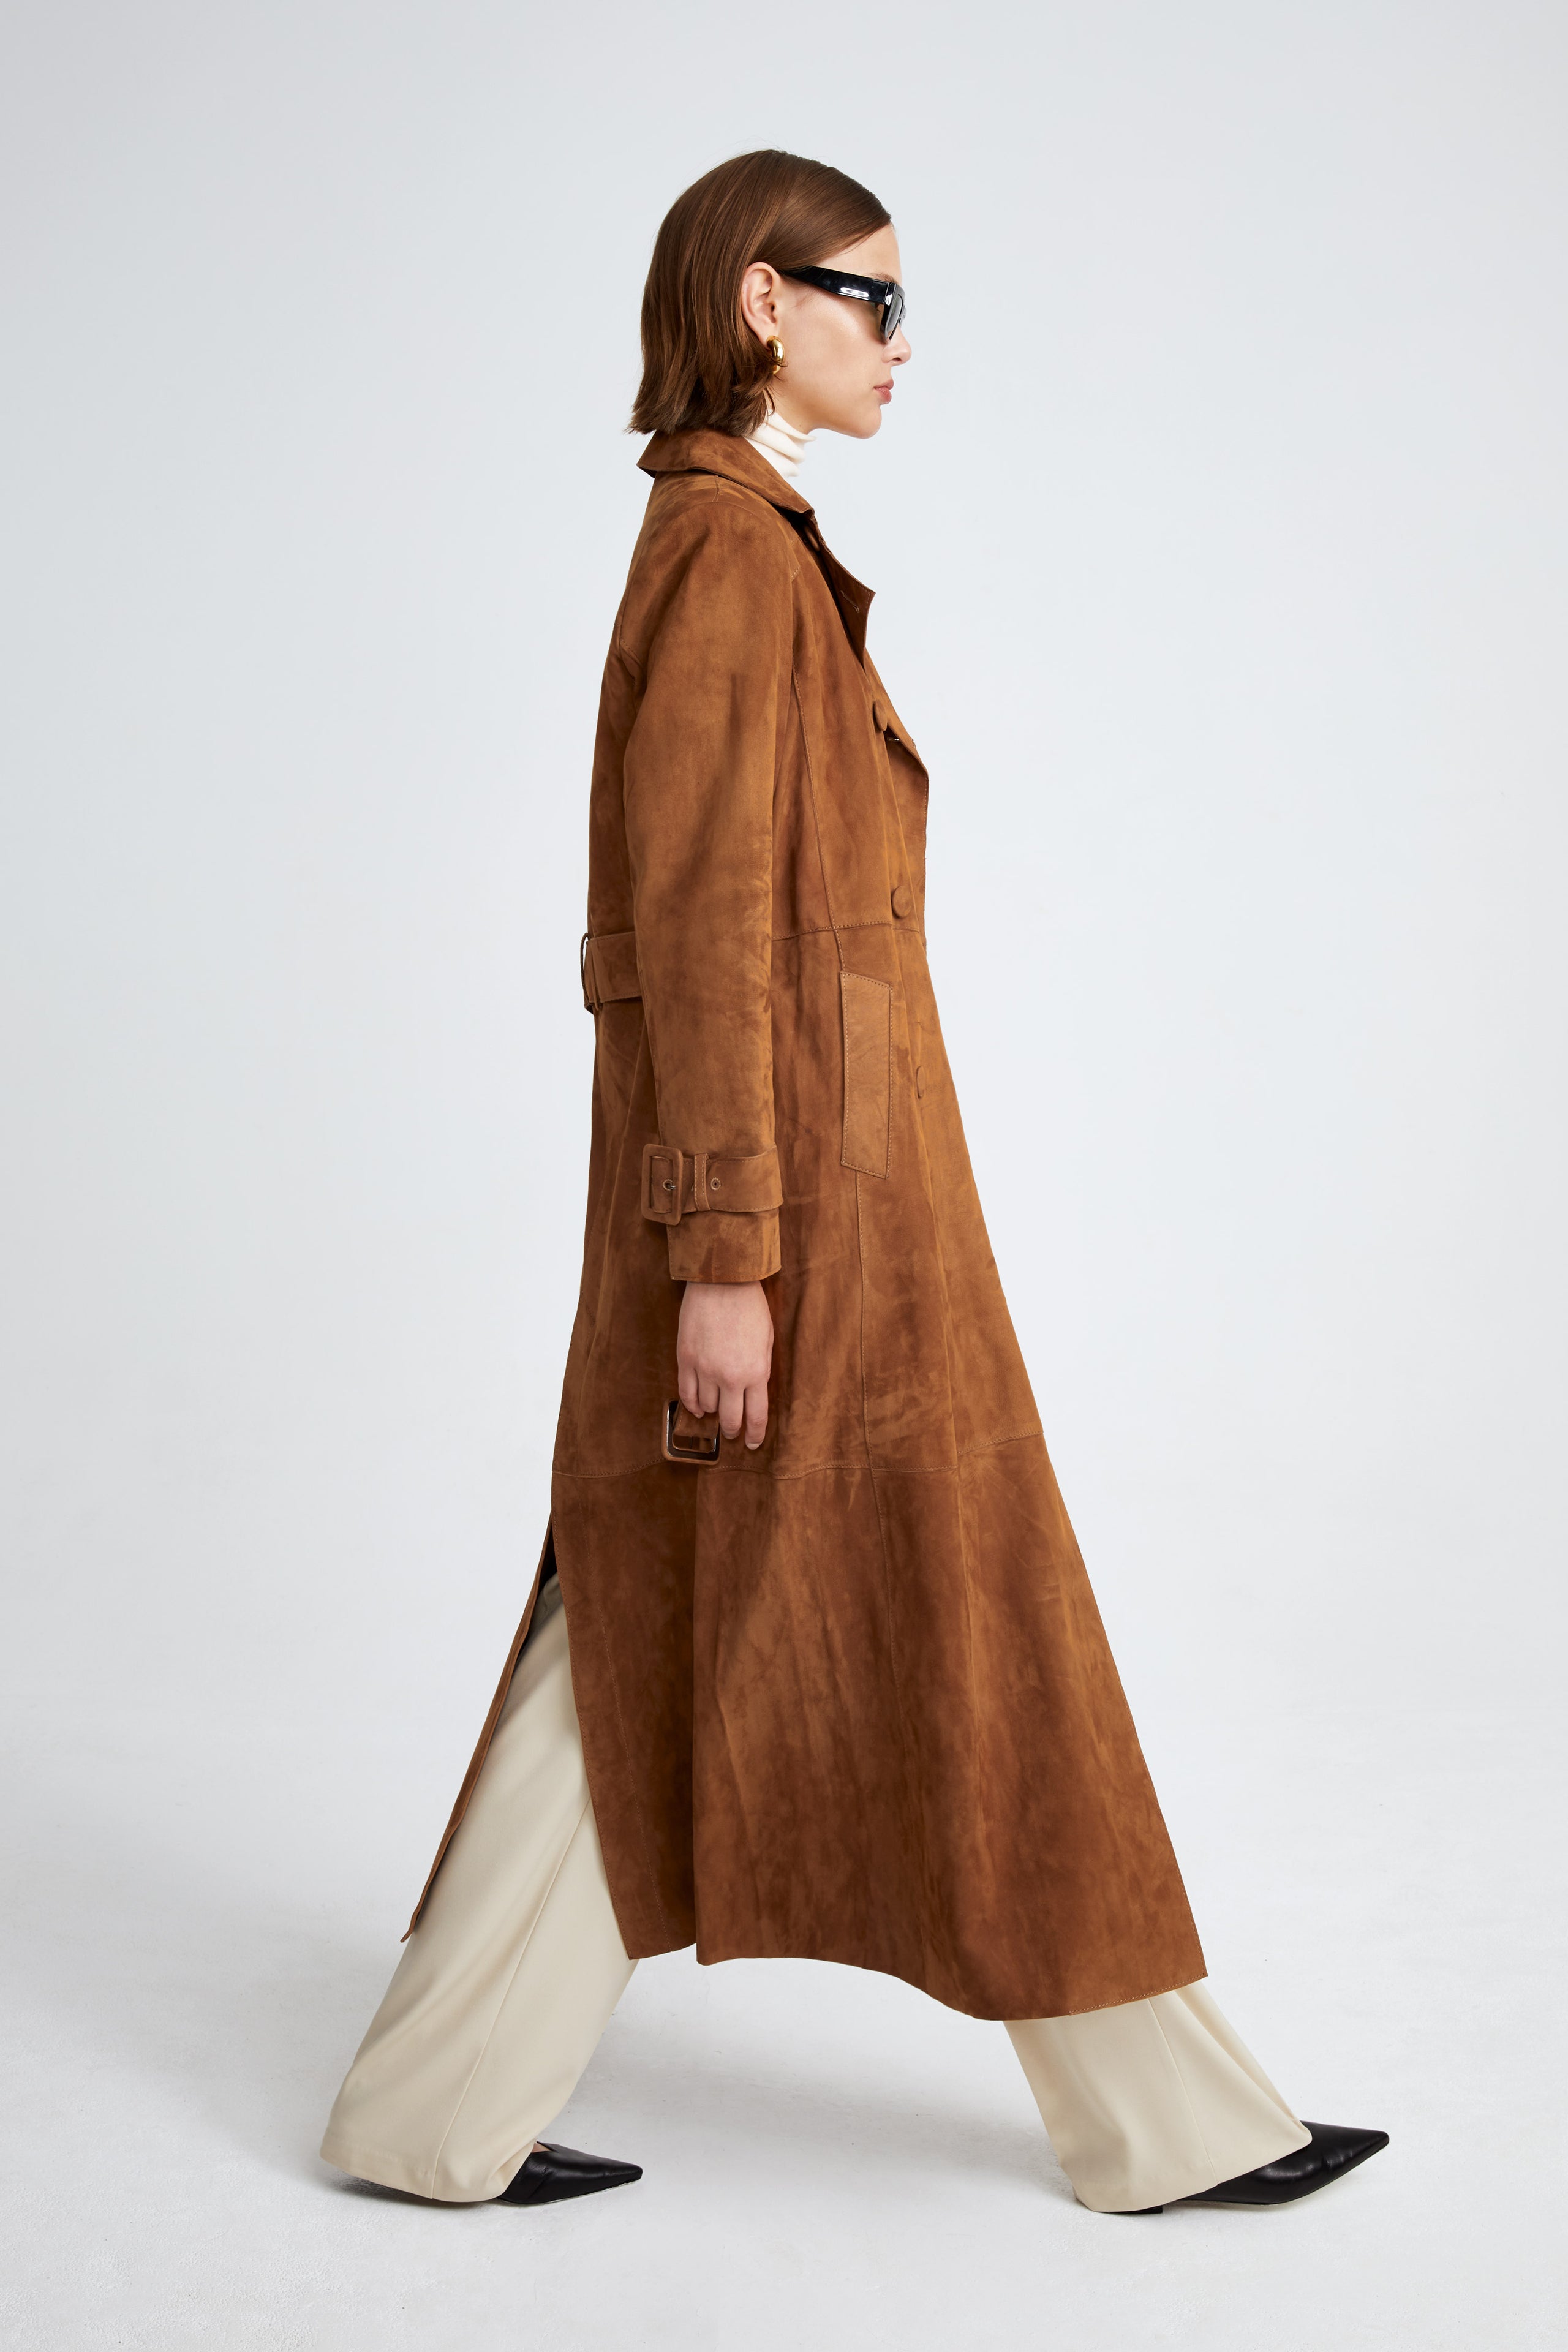 Model is wearing the Tate Caramel Everyday Suede Trench Coat Side